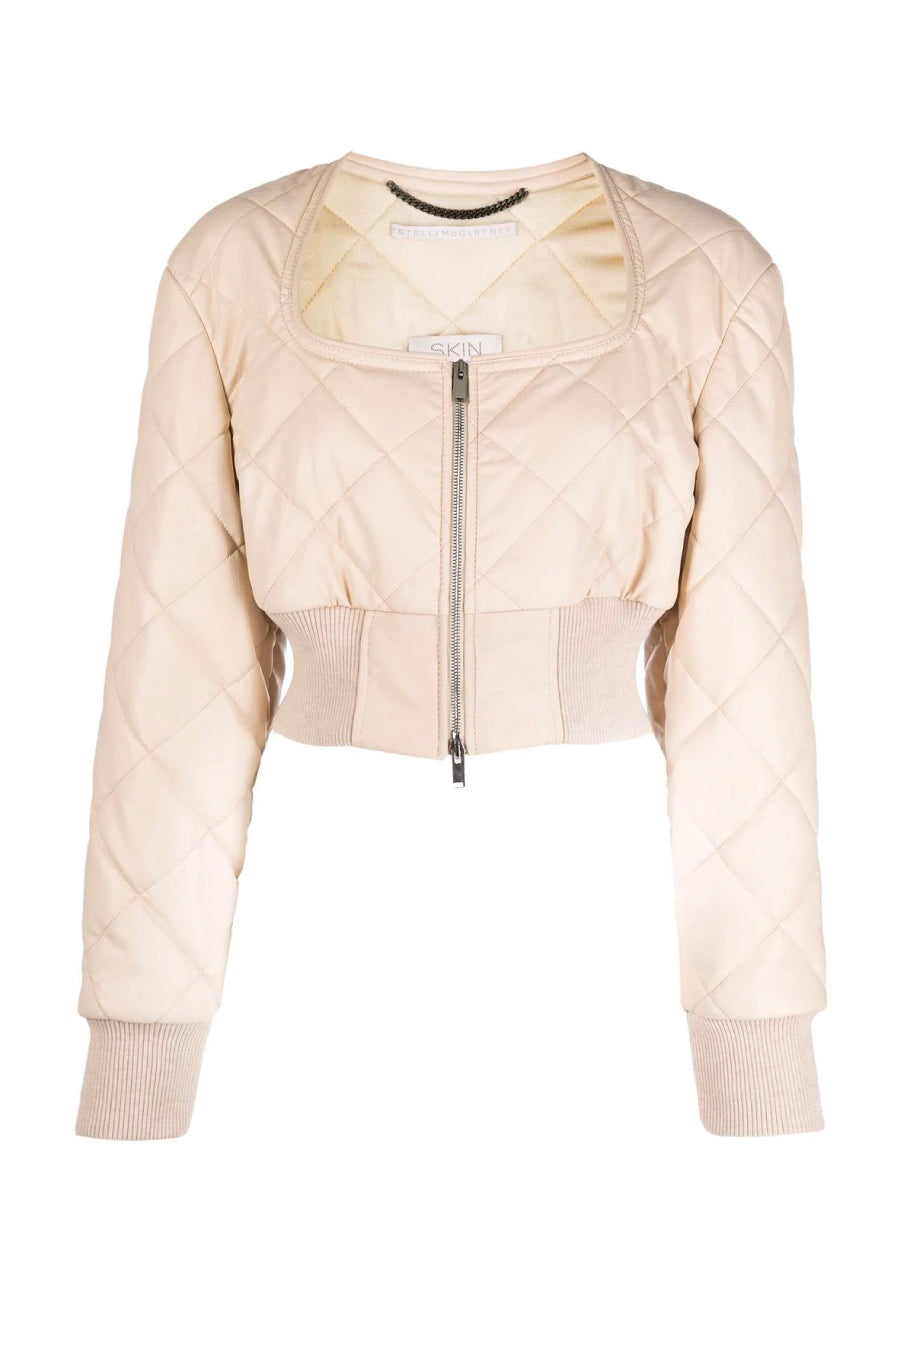 Stella McCartney Quilted Cropped Bomber Jacket - Oat